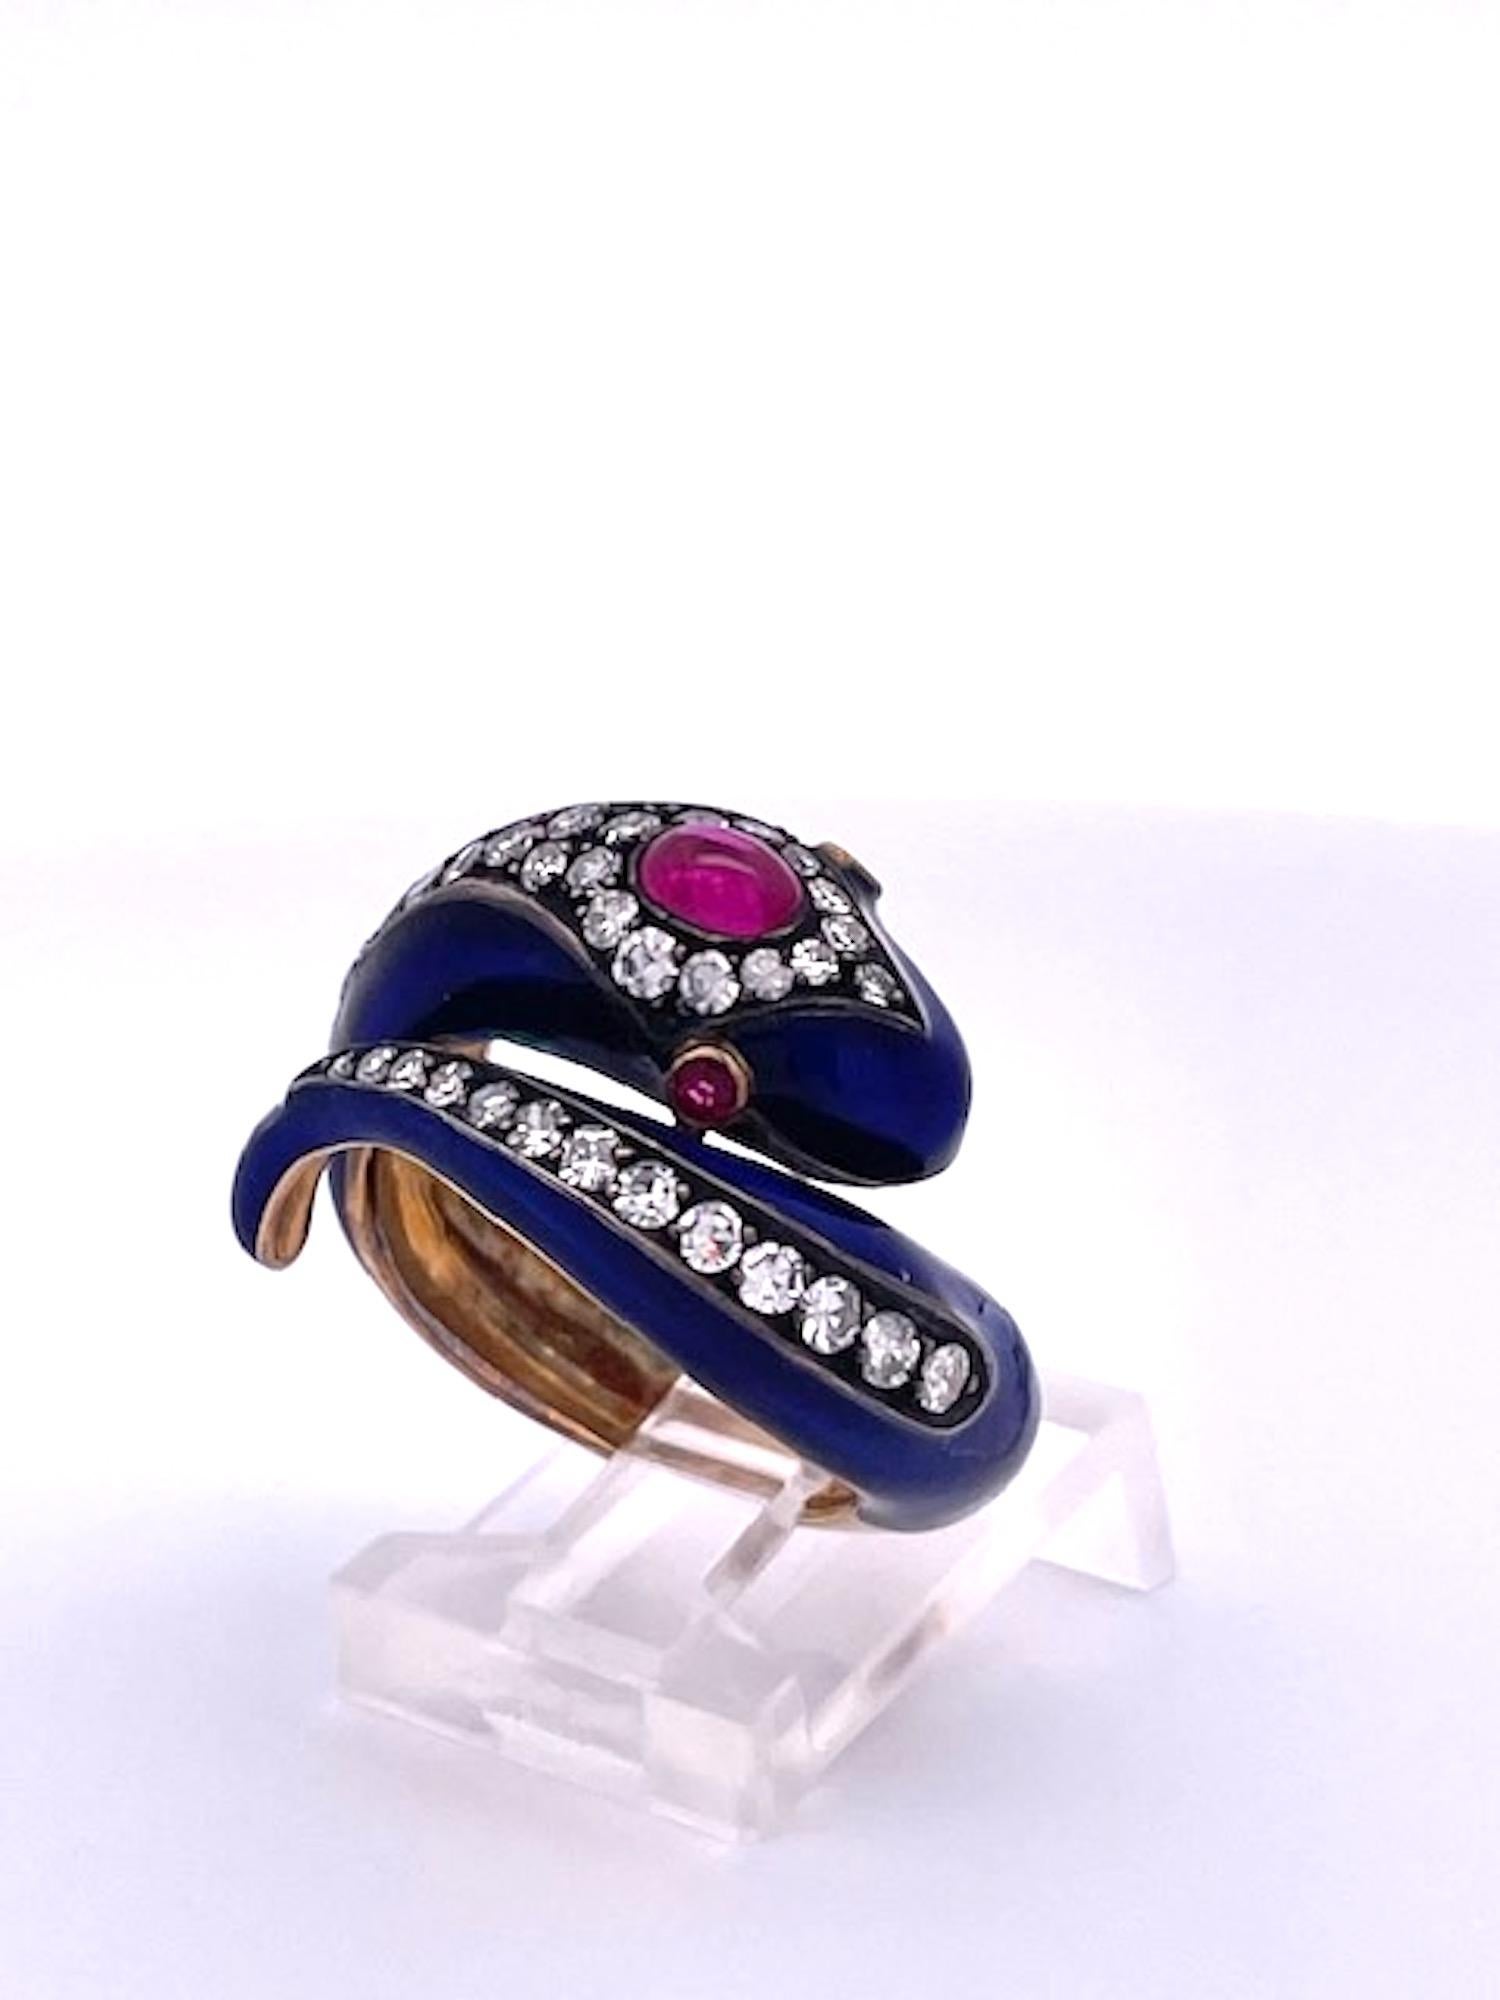 This 18K snake ring is enameled in Cobalt blue and has Rubies and Diamonds all around.  This ring is from the 1800's and is remarkable condition.The head is set with one (1) oval Ruby Cabochon of 0.36 carats and there are two Ruby eyes. In addition